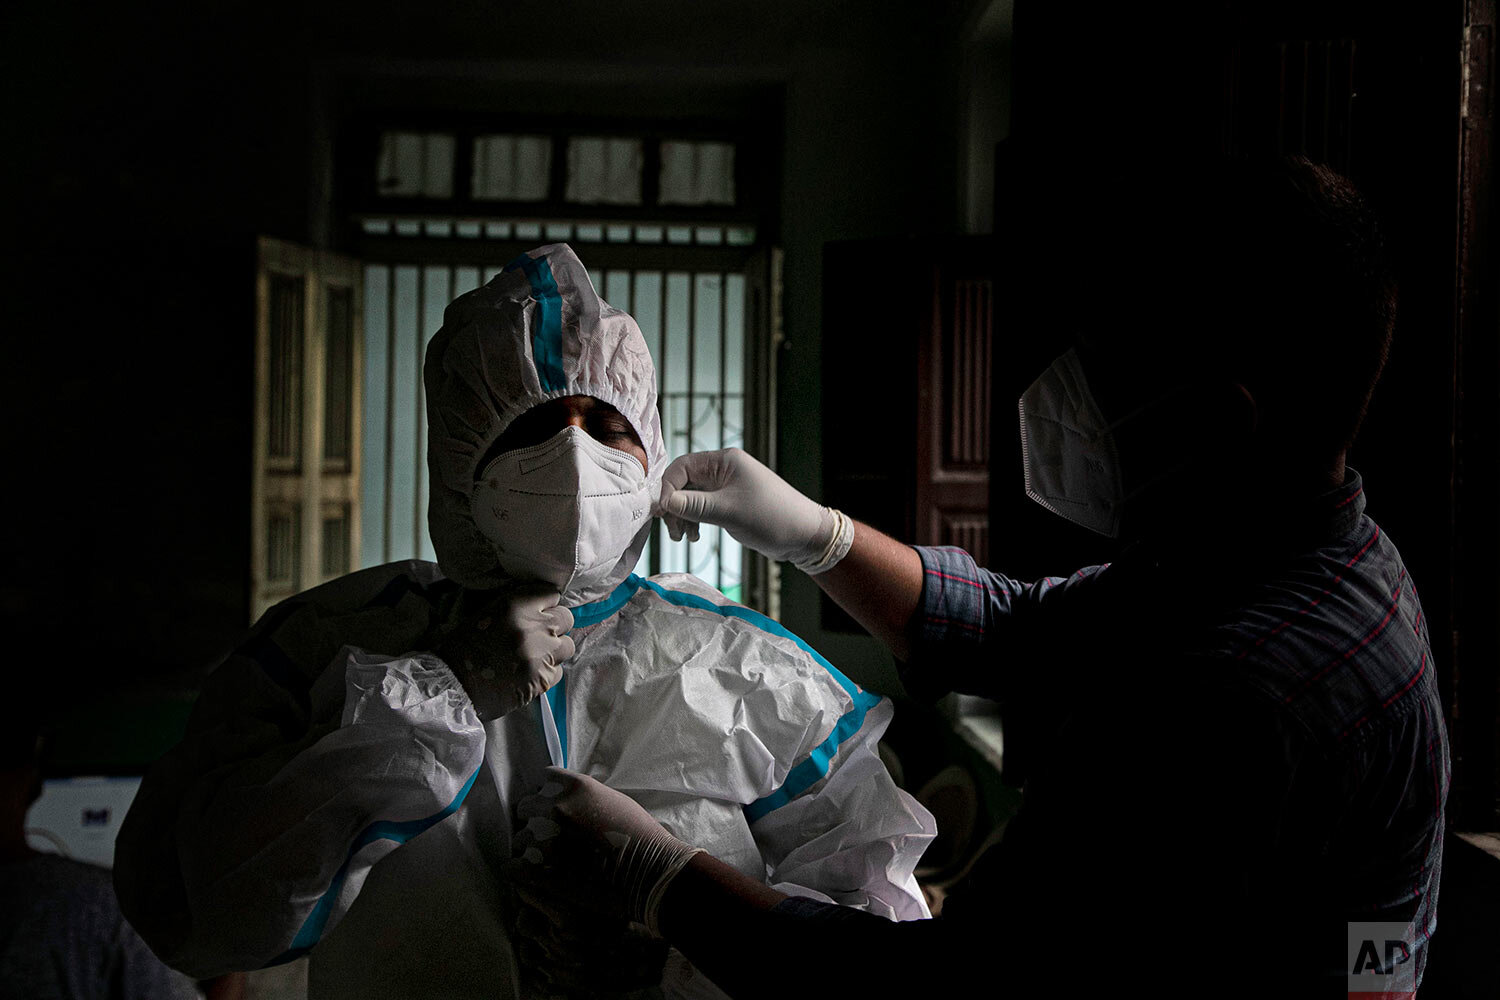  A health worker helps another wear protective gear before proceeding to take nasal swab samples to test for COVID-19 in Gauhati, India, Friday, Aug. 7, 2020.  (AP Photo/Anupam Nath) 